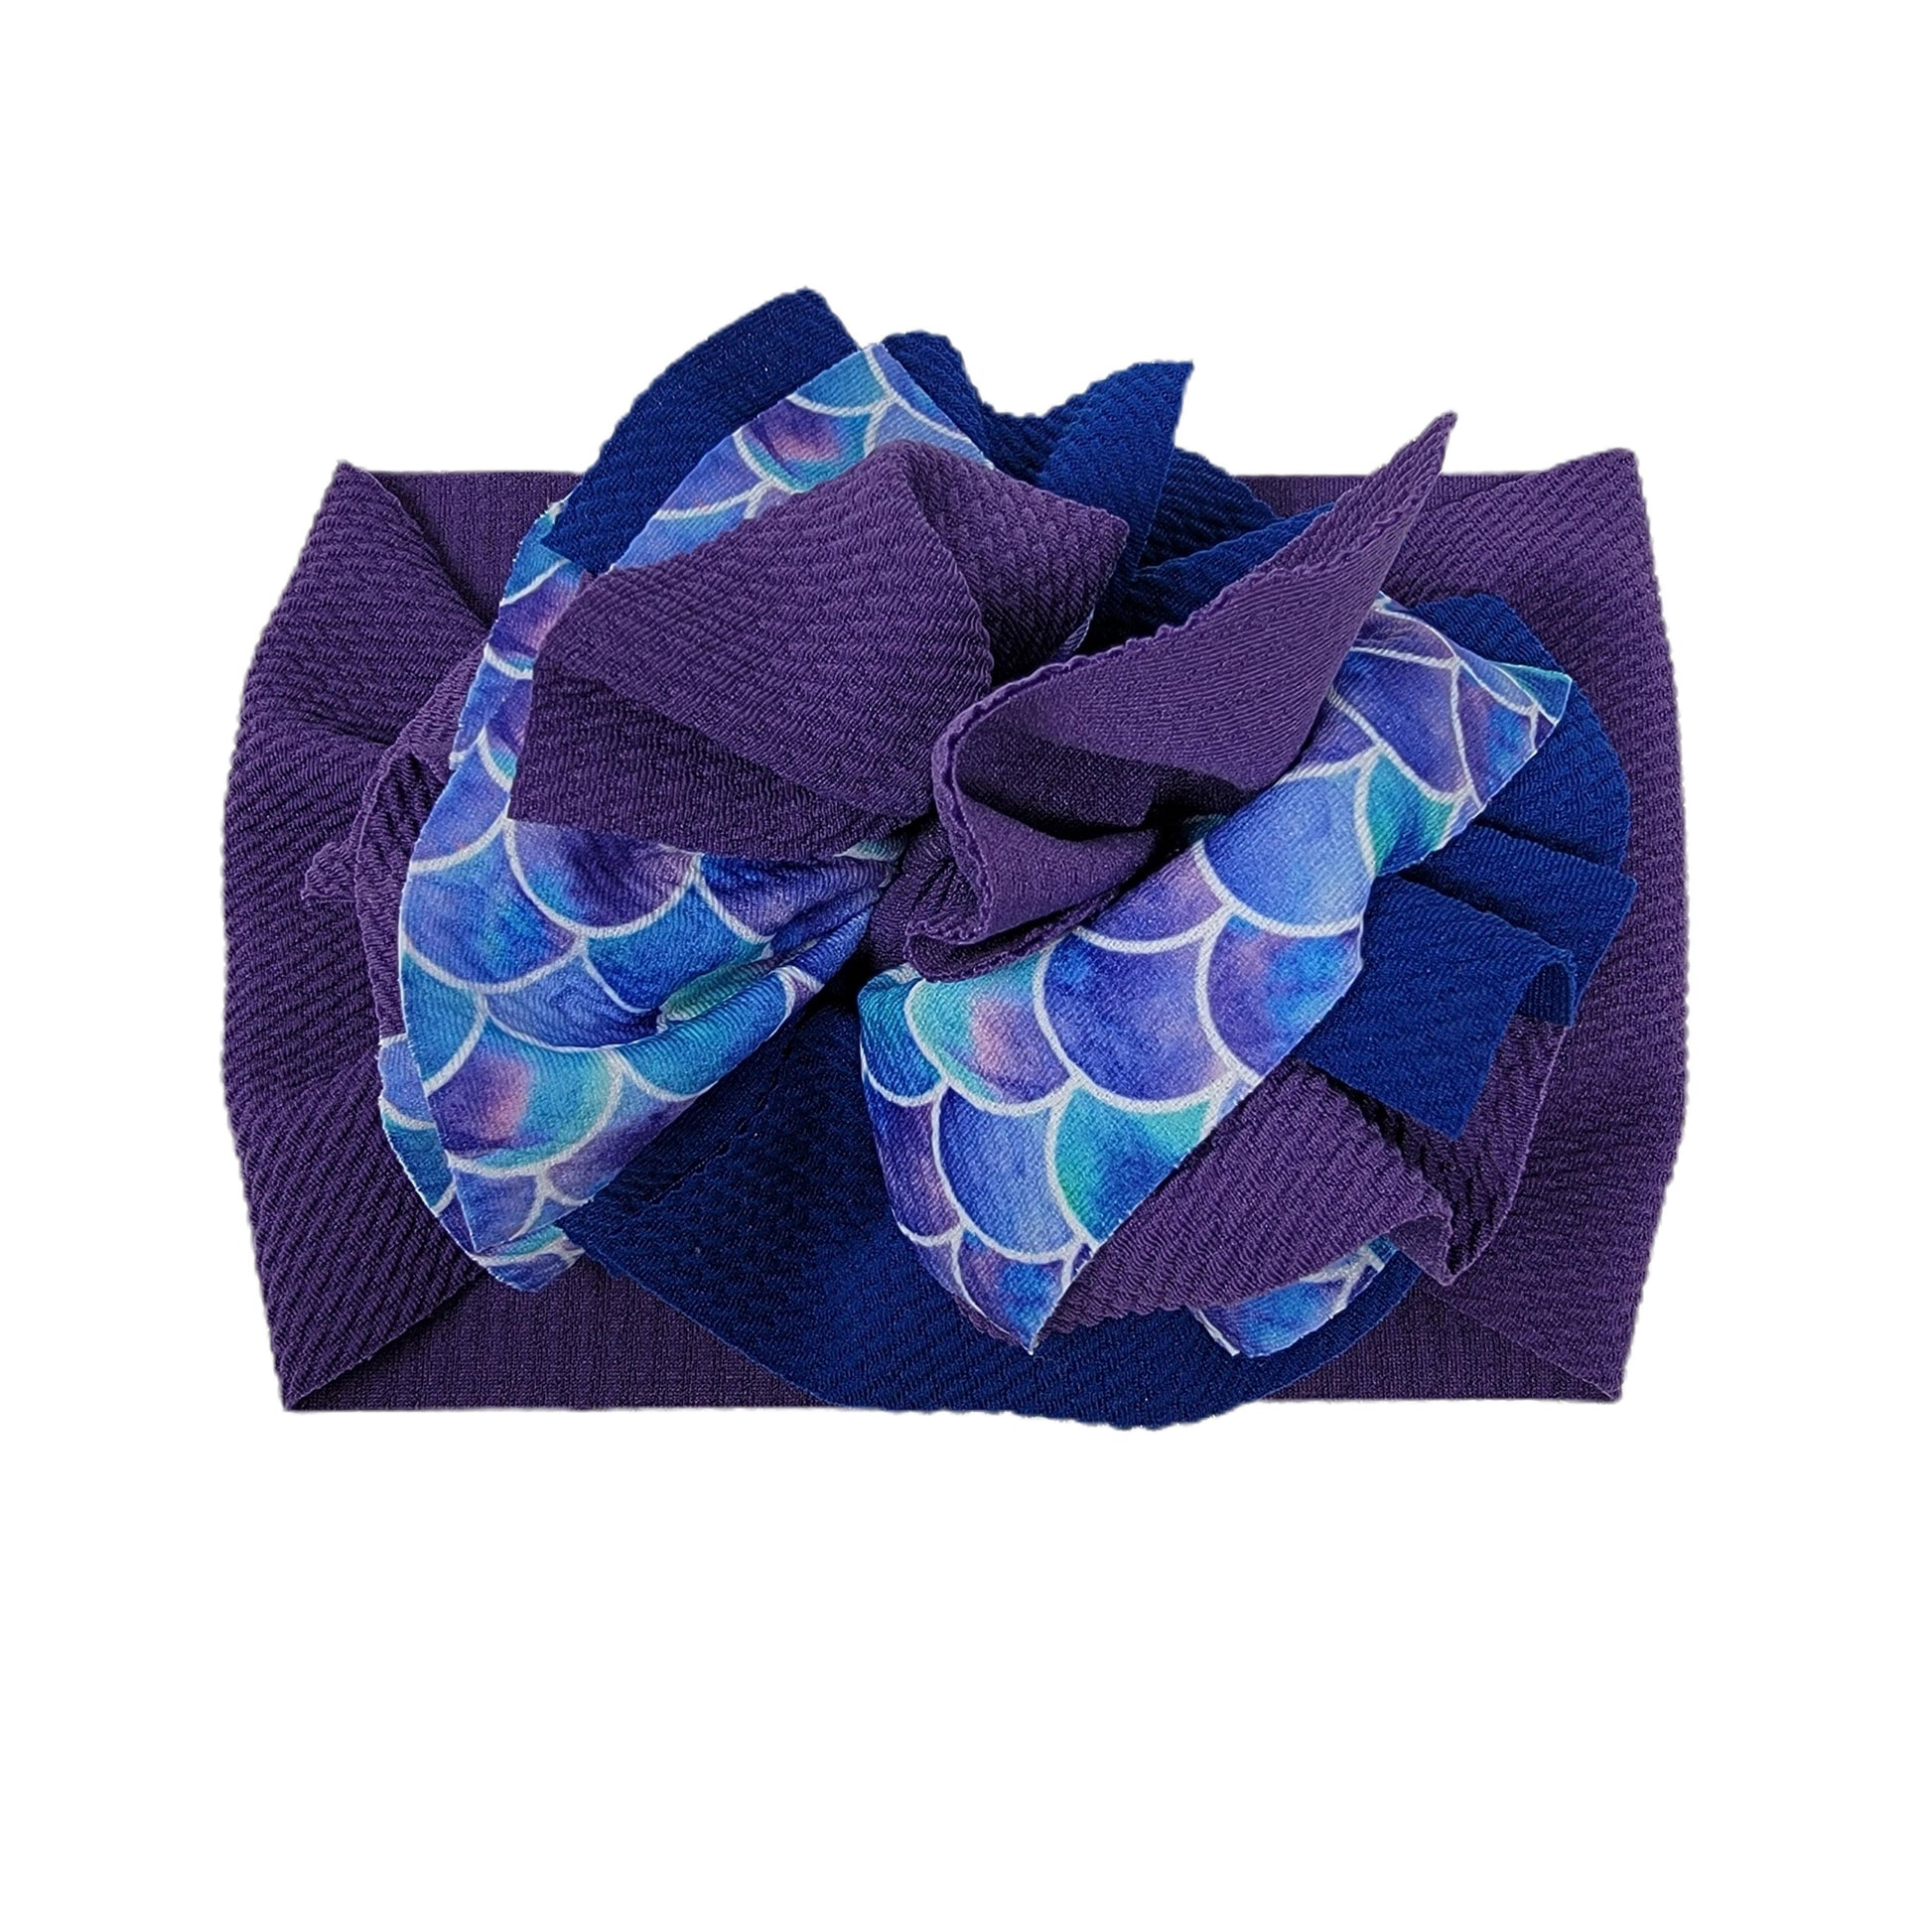 Blue Mermaids Scales Messy Fabric Headwrap 5" 